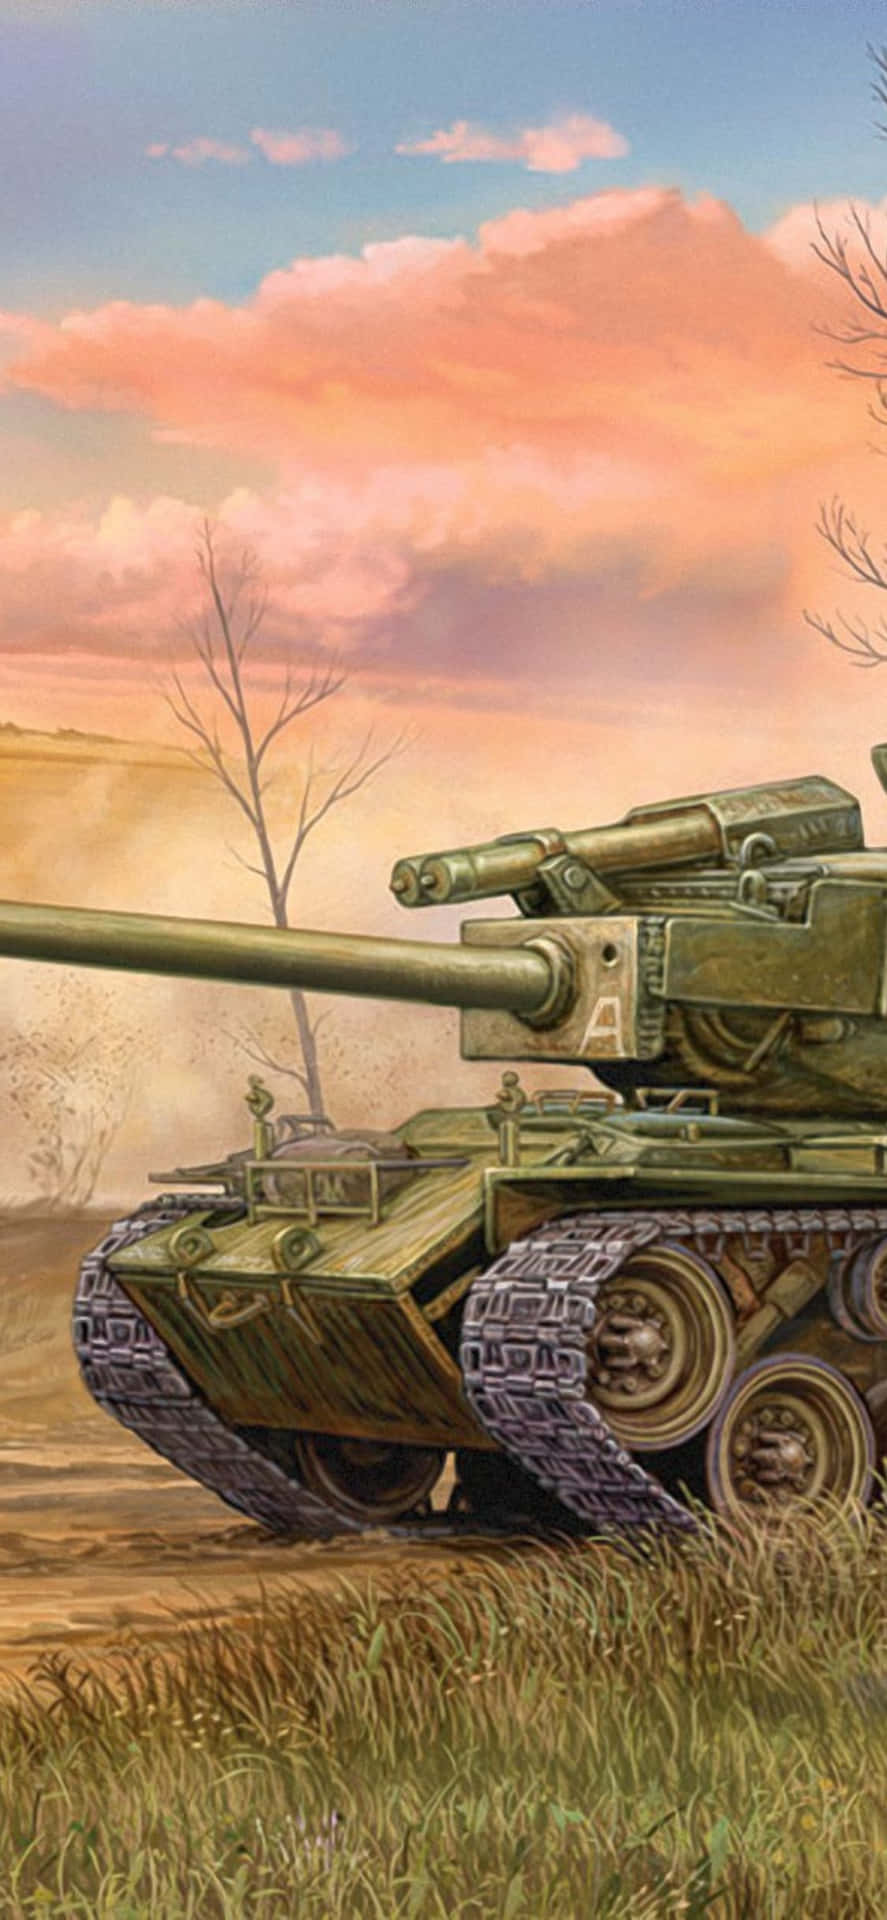 A Painting Of A Tank In The Desert